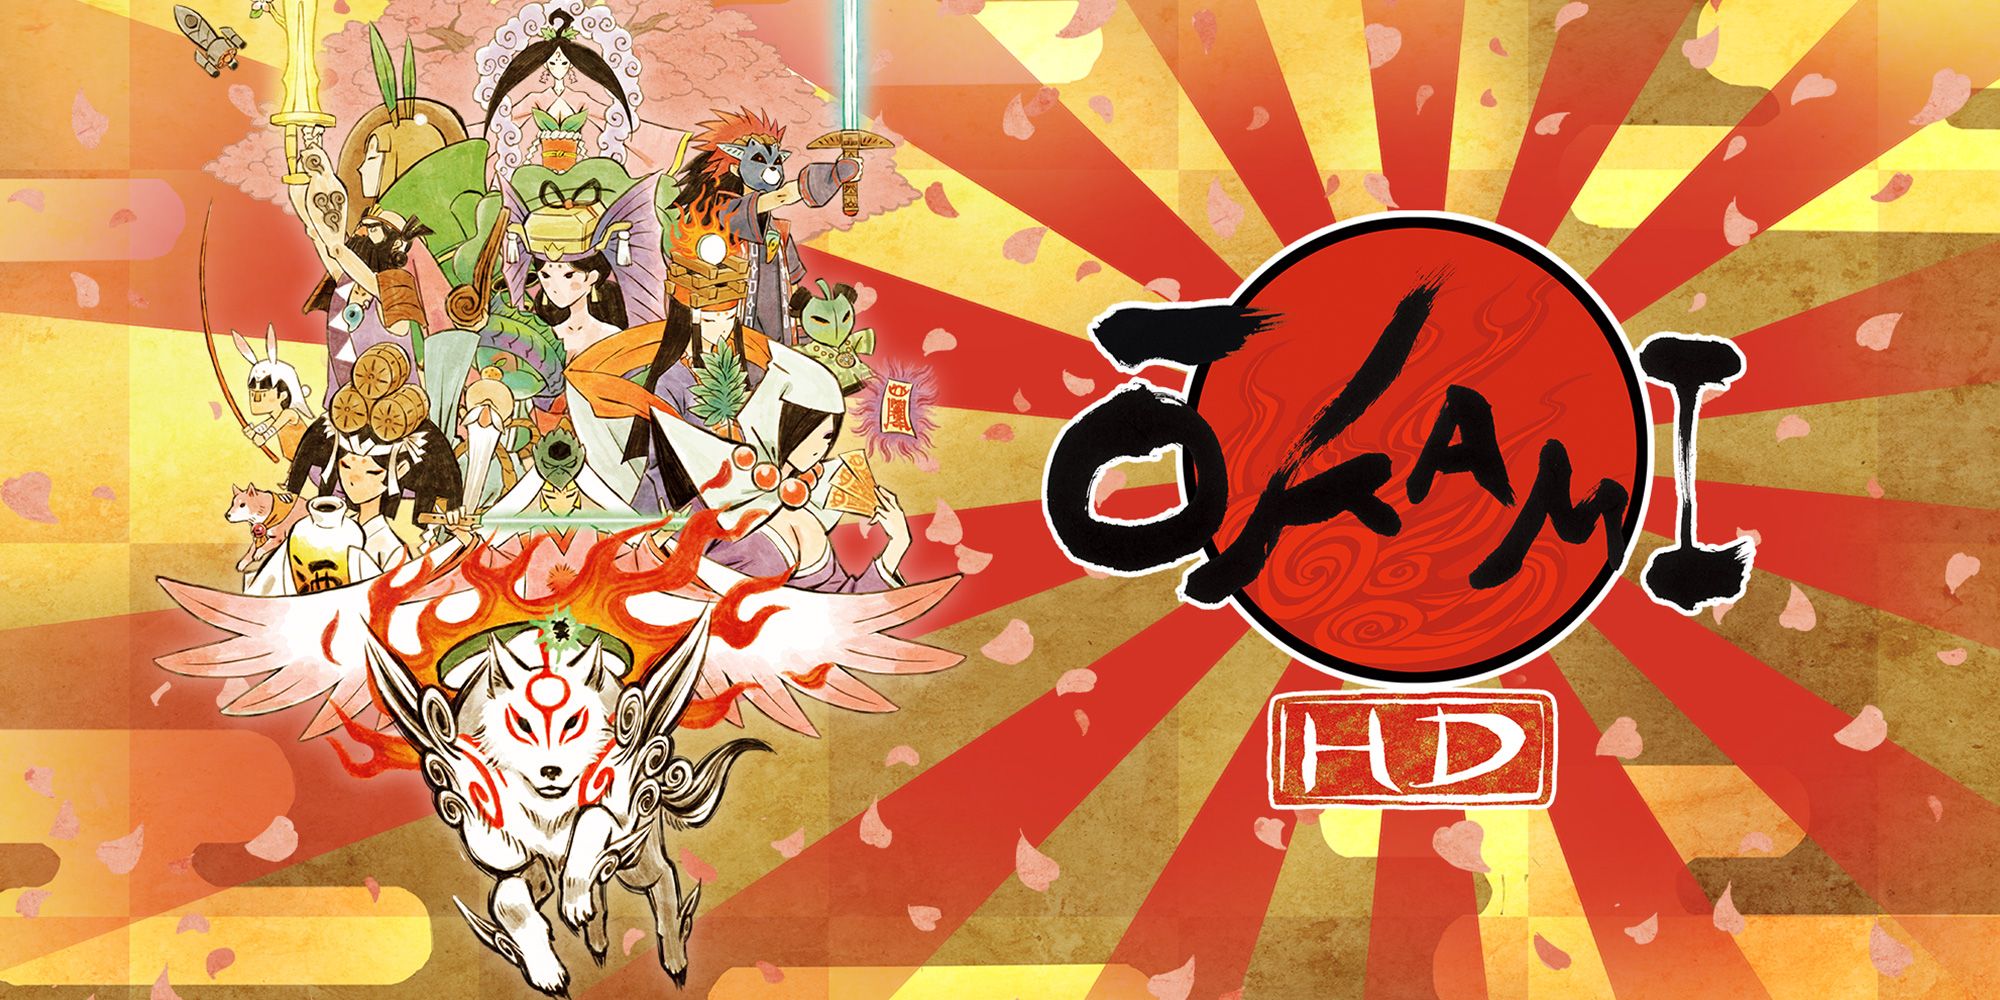 A poster for Okami